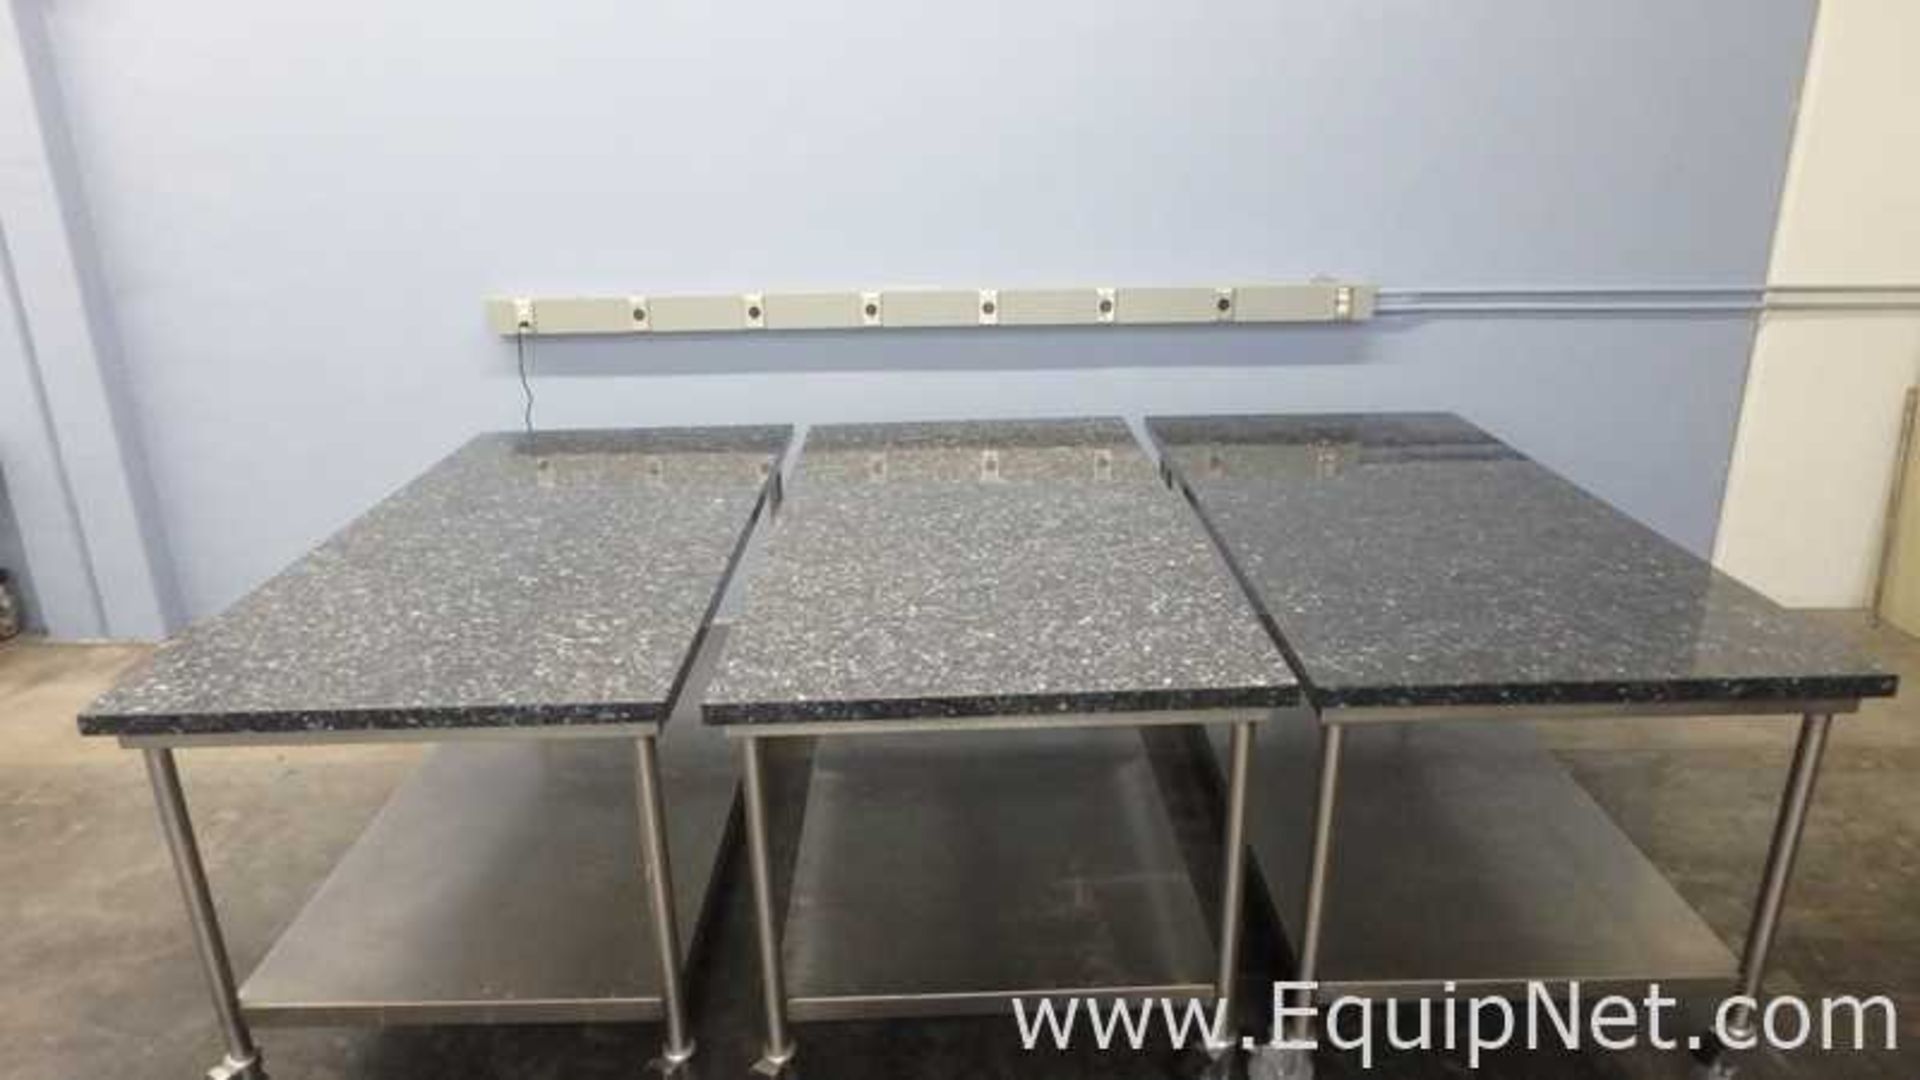 Lot of 3 Granite Top Stainless Steel Work Tables 75in x 39in - Image 4 of 9